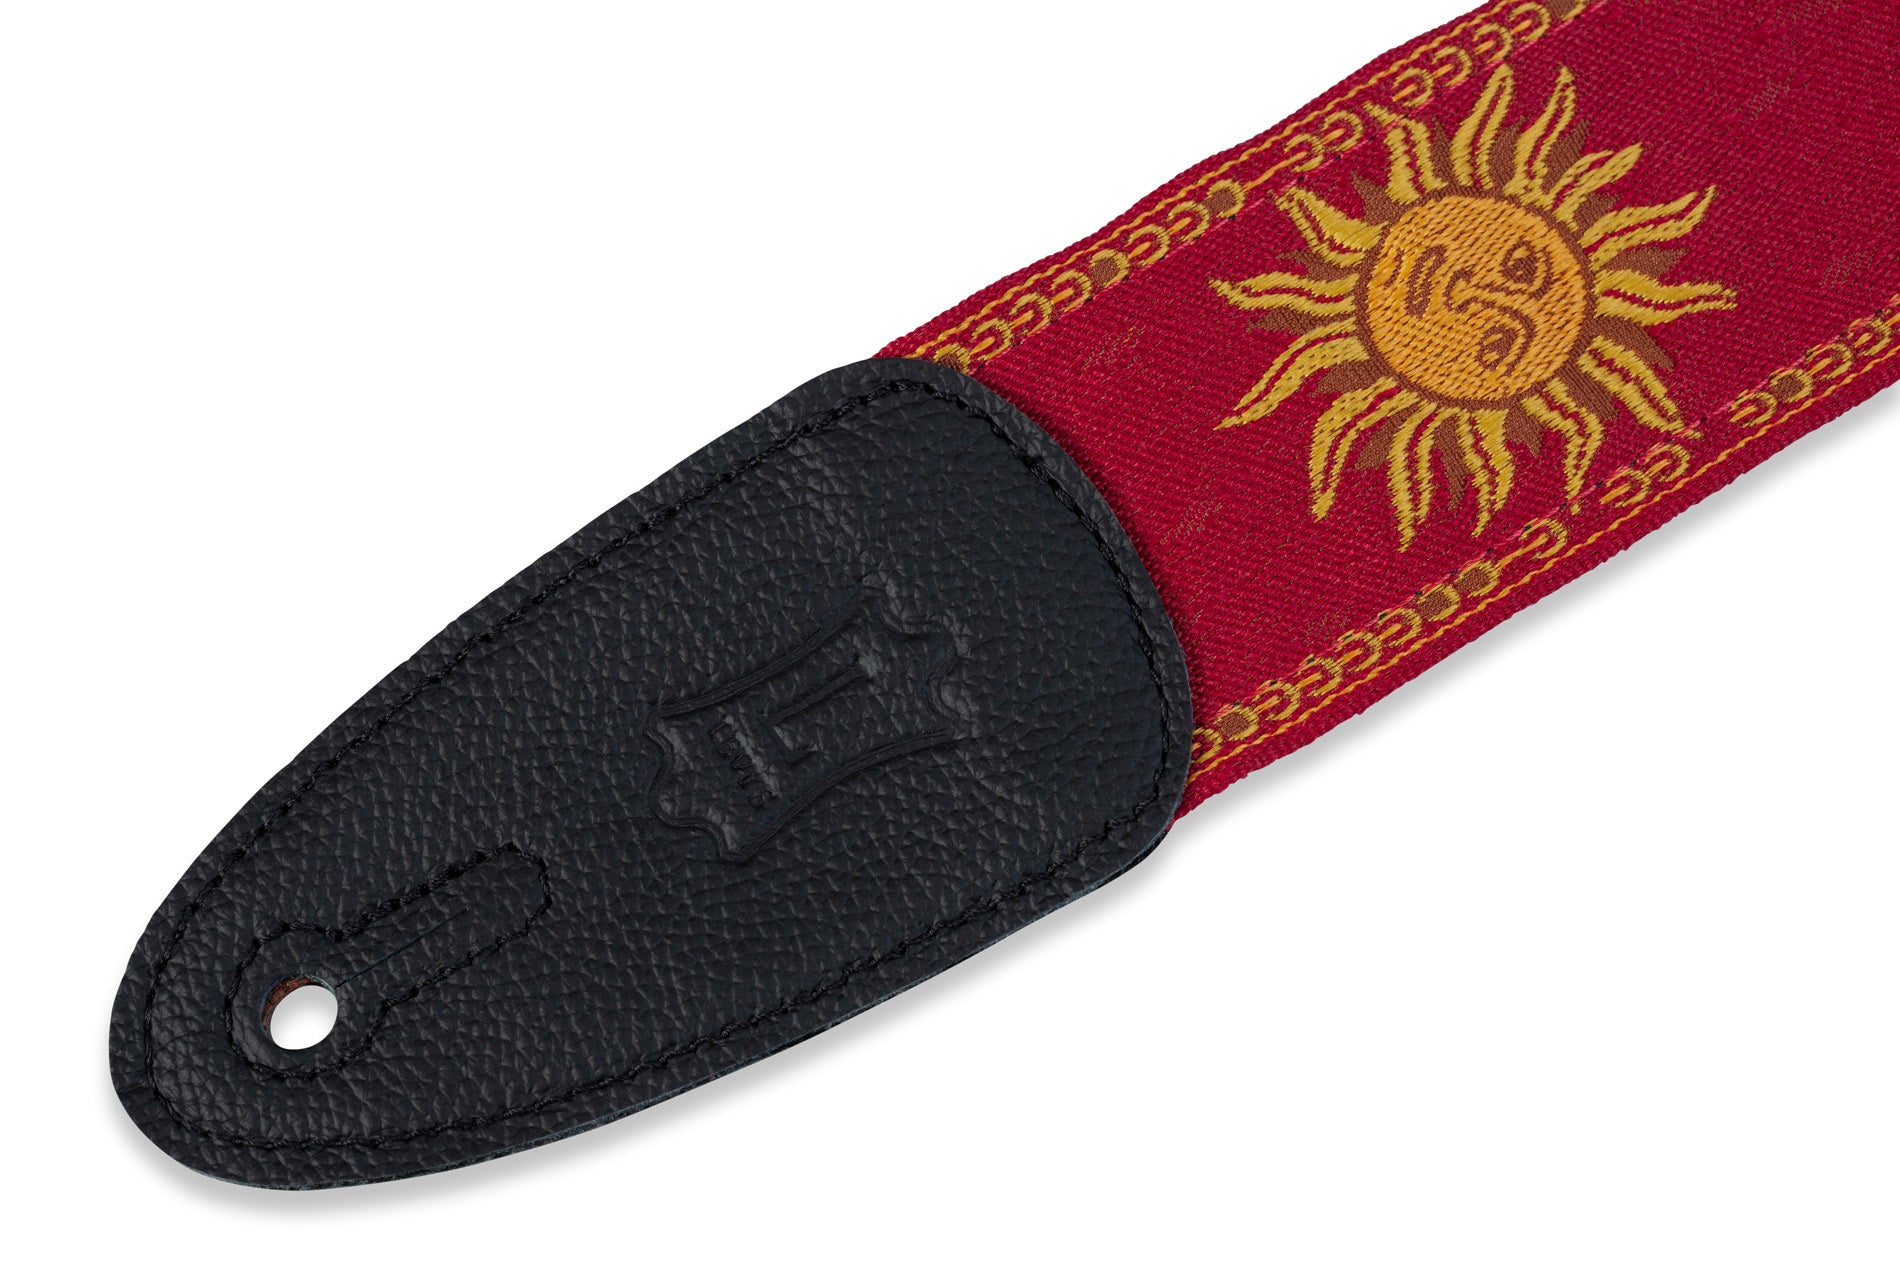 Levy's MPJG-SUN-RED guitar strap